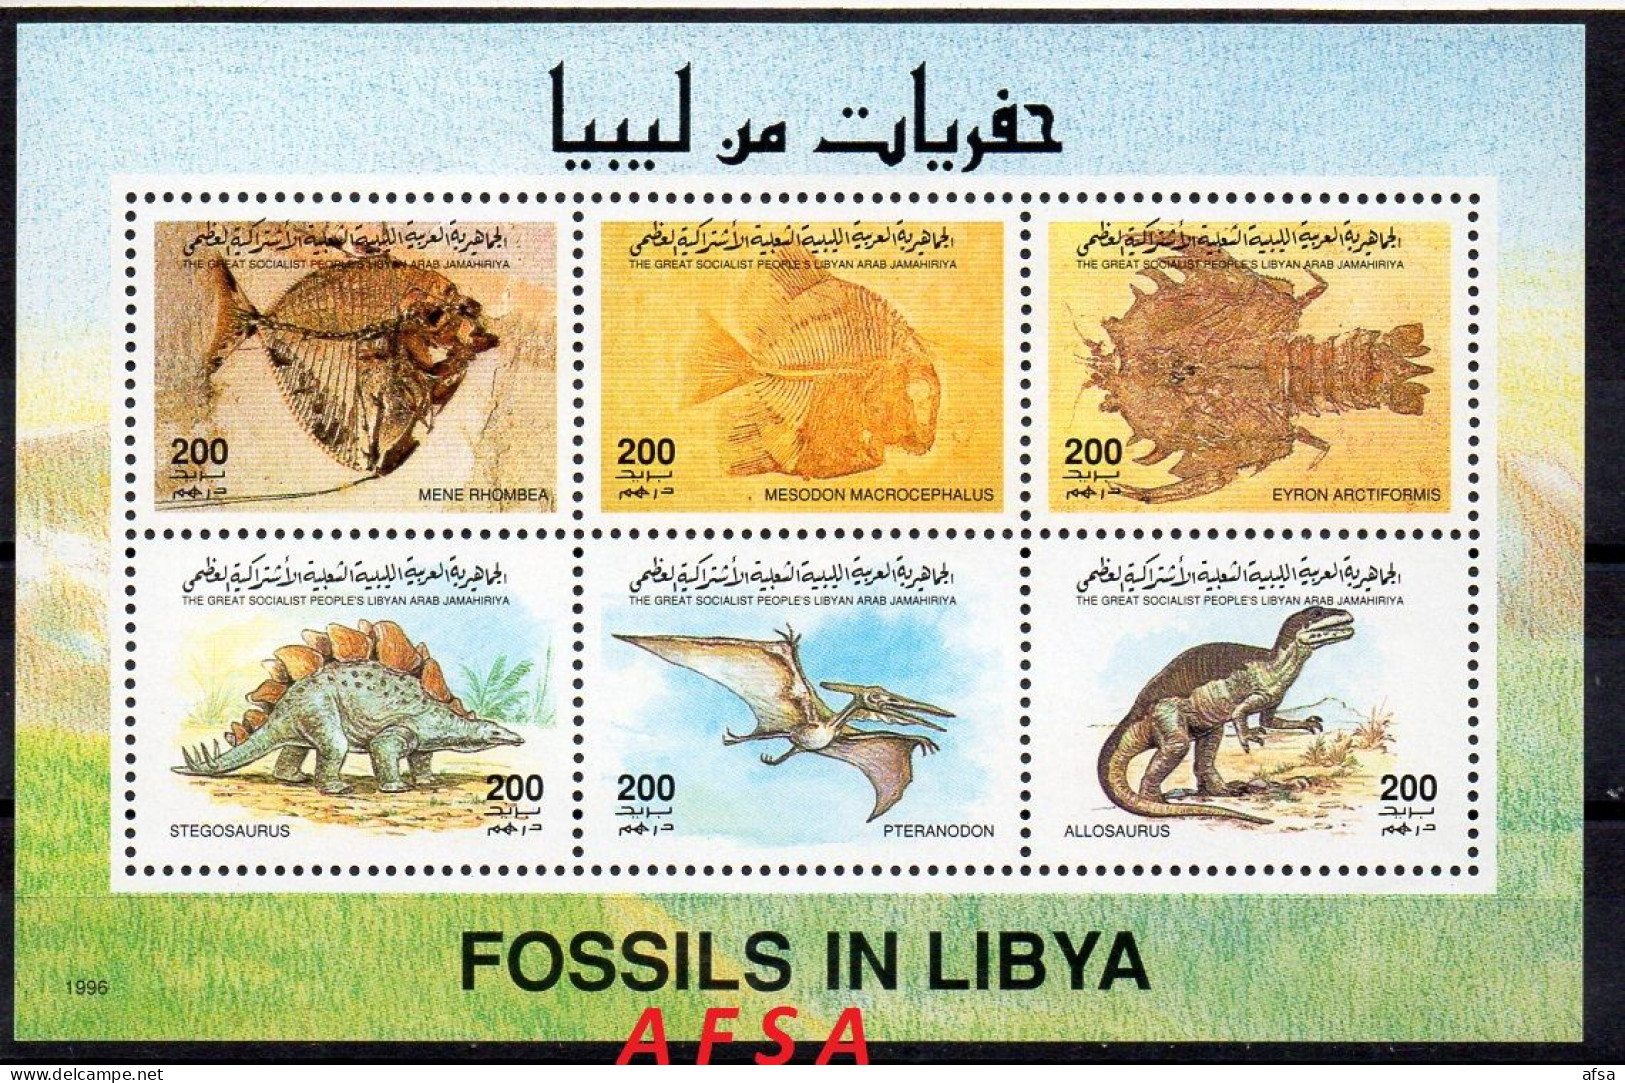 Libya 1996-Fossils And Dinosaurs-MNH** //  Libye 1996-Fossiles Et Dinosaures-Neuf** - Fossili